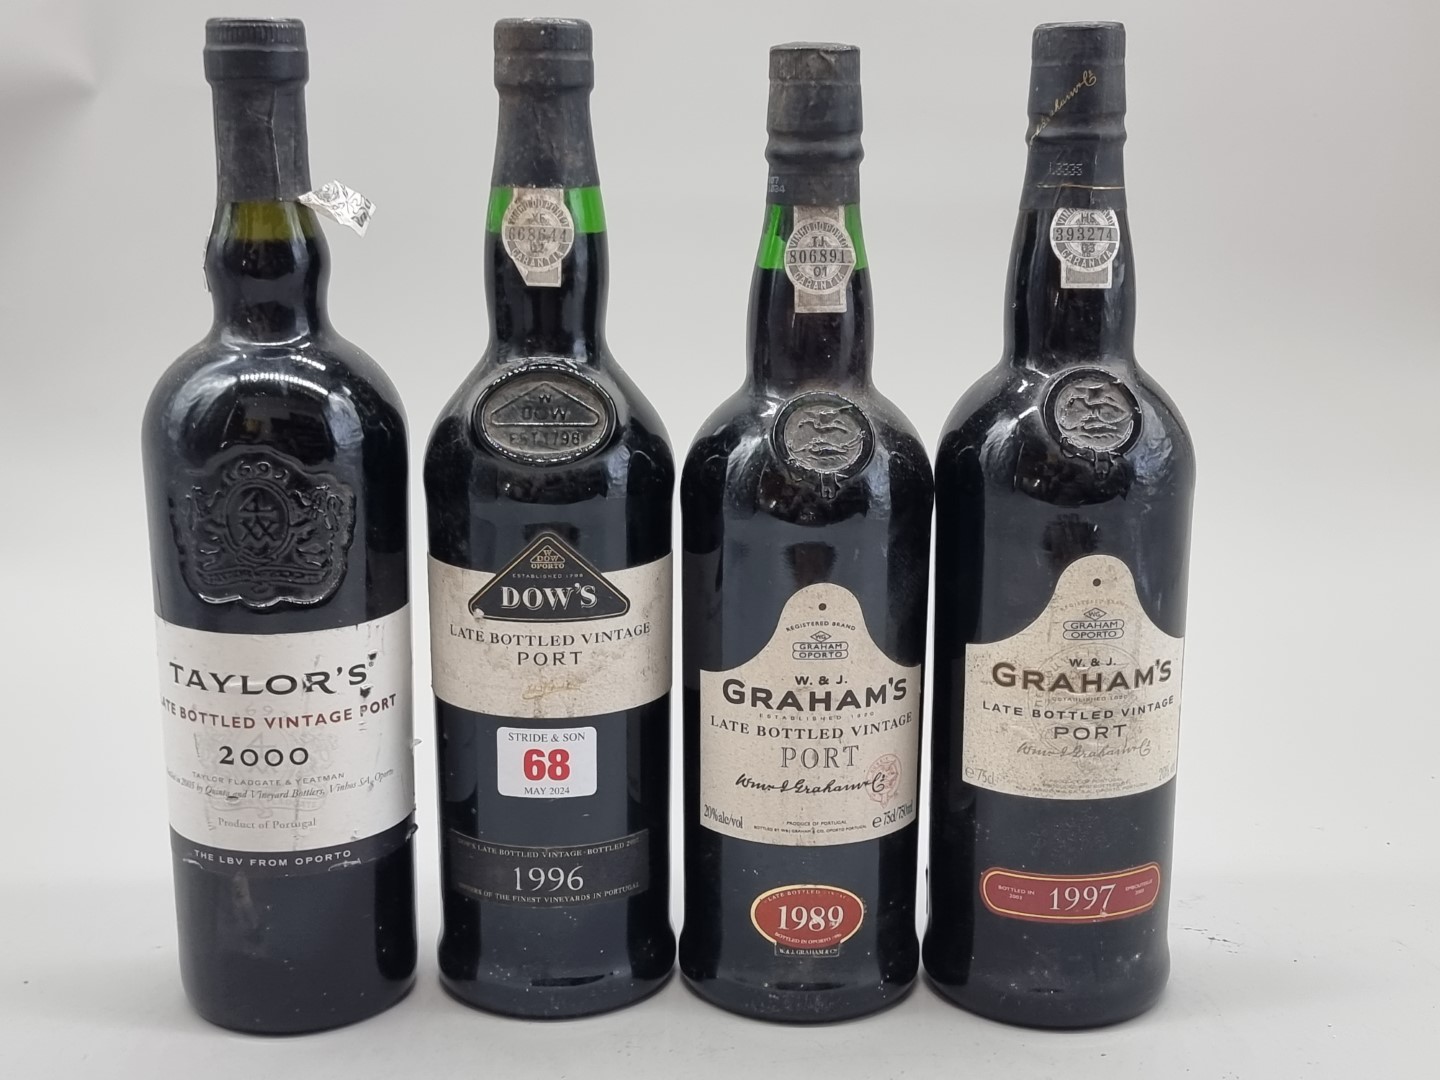 Four 75cl bottles of LBV Port, comprising: Graham's 1989; Dow's 1996; Graham's 1997; and Taylor's